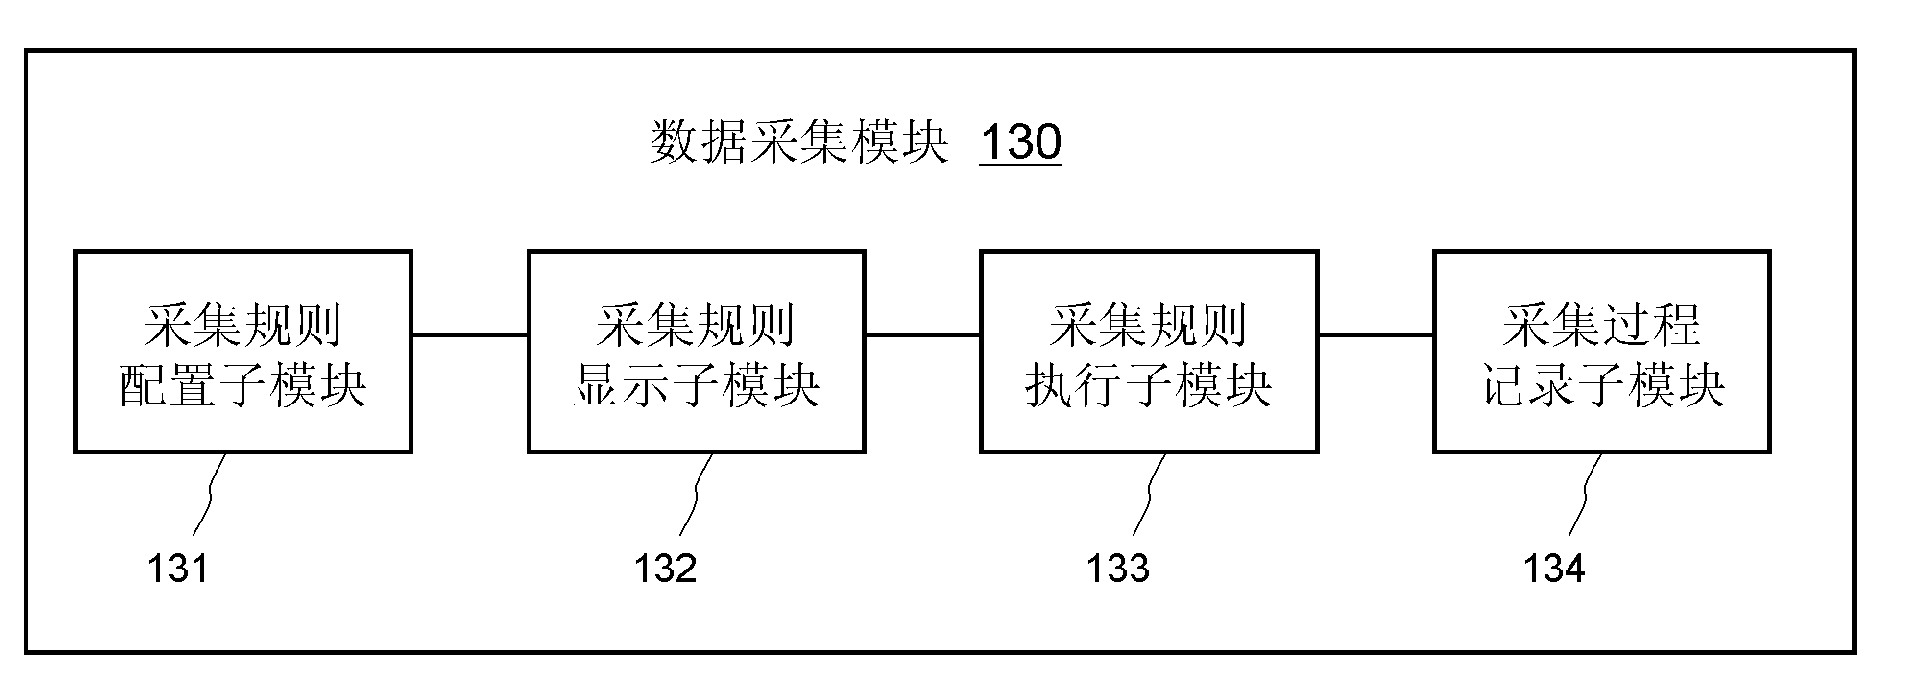 Operation maintenance system of distributed IT system, and operation maintenance management method thereof